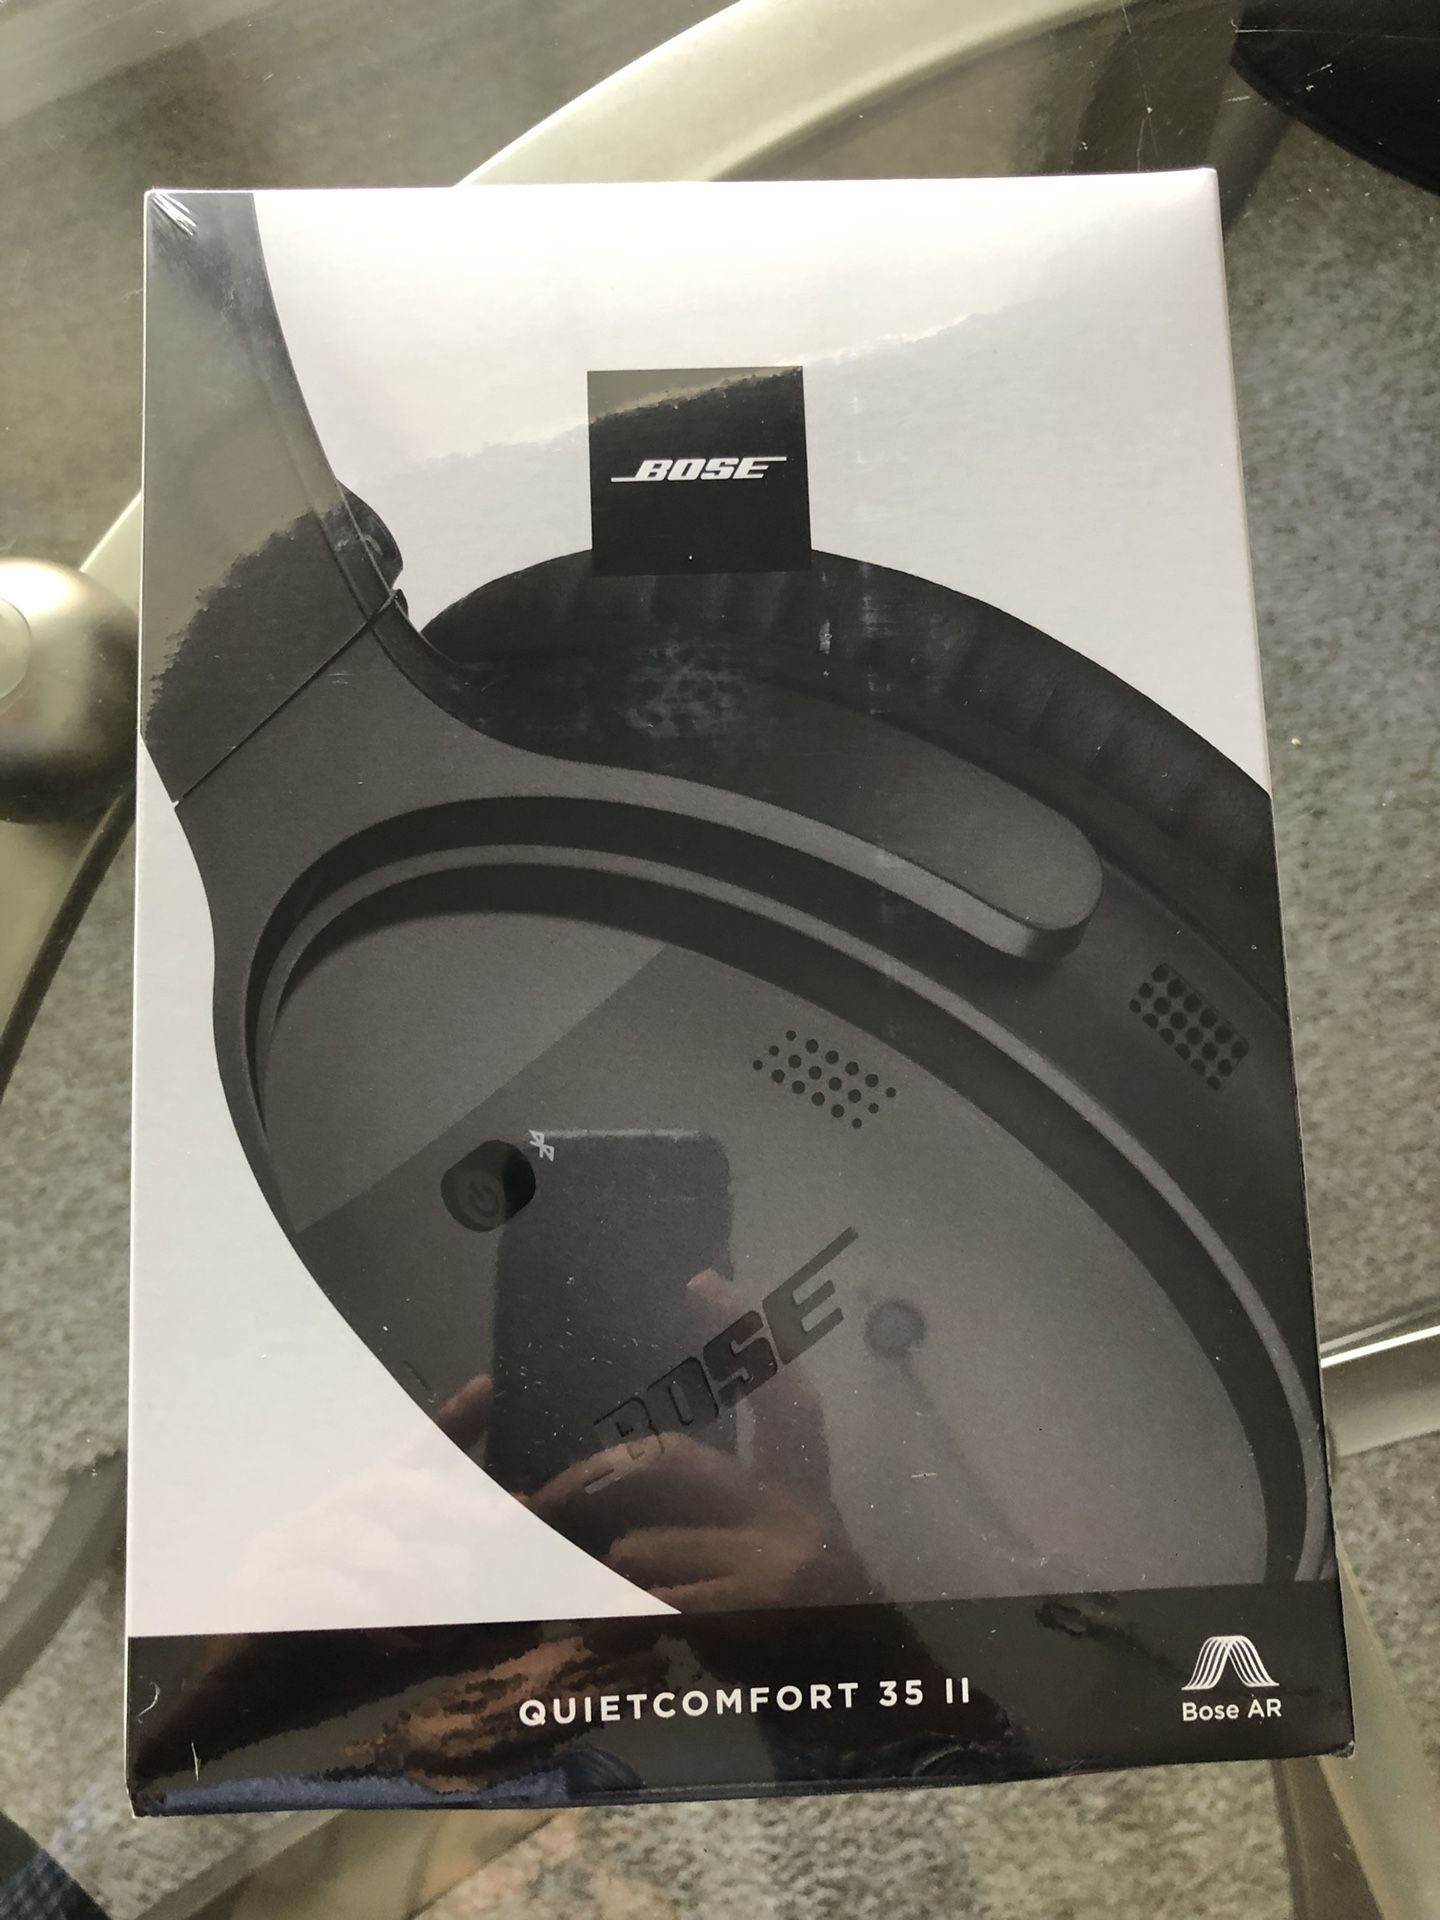 Bose QC 35 2 with voice cancellation feature